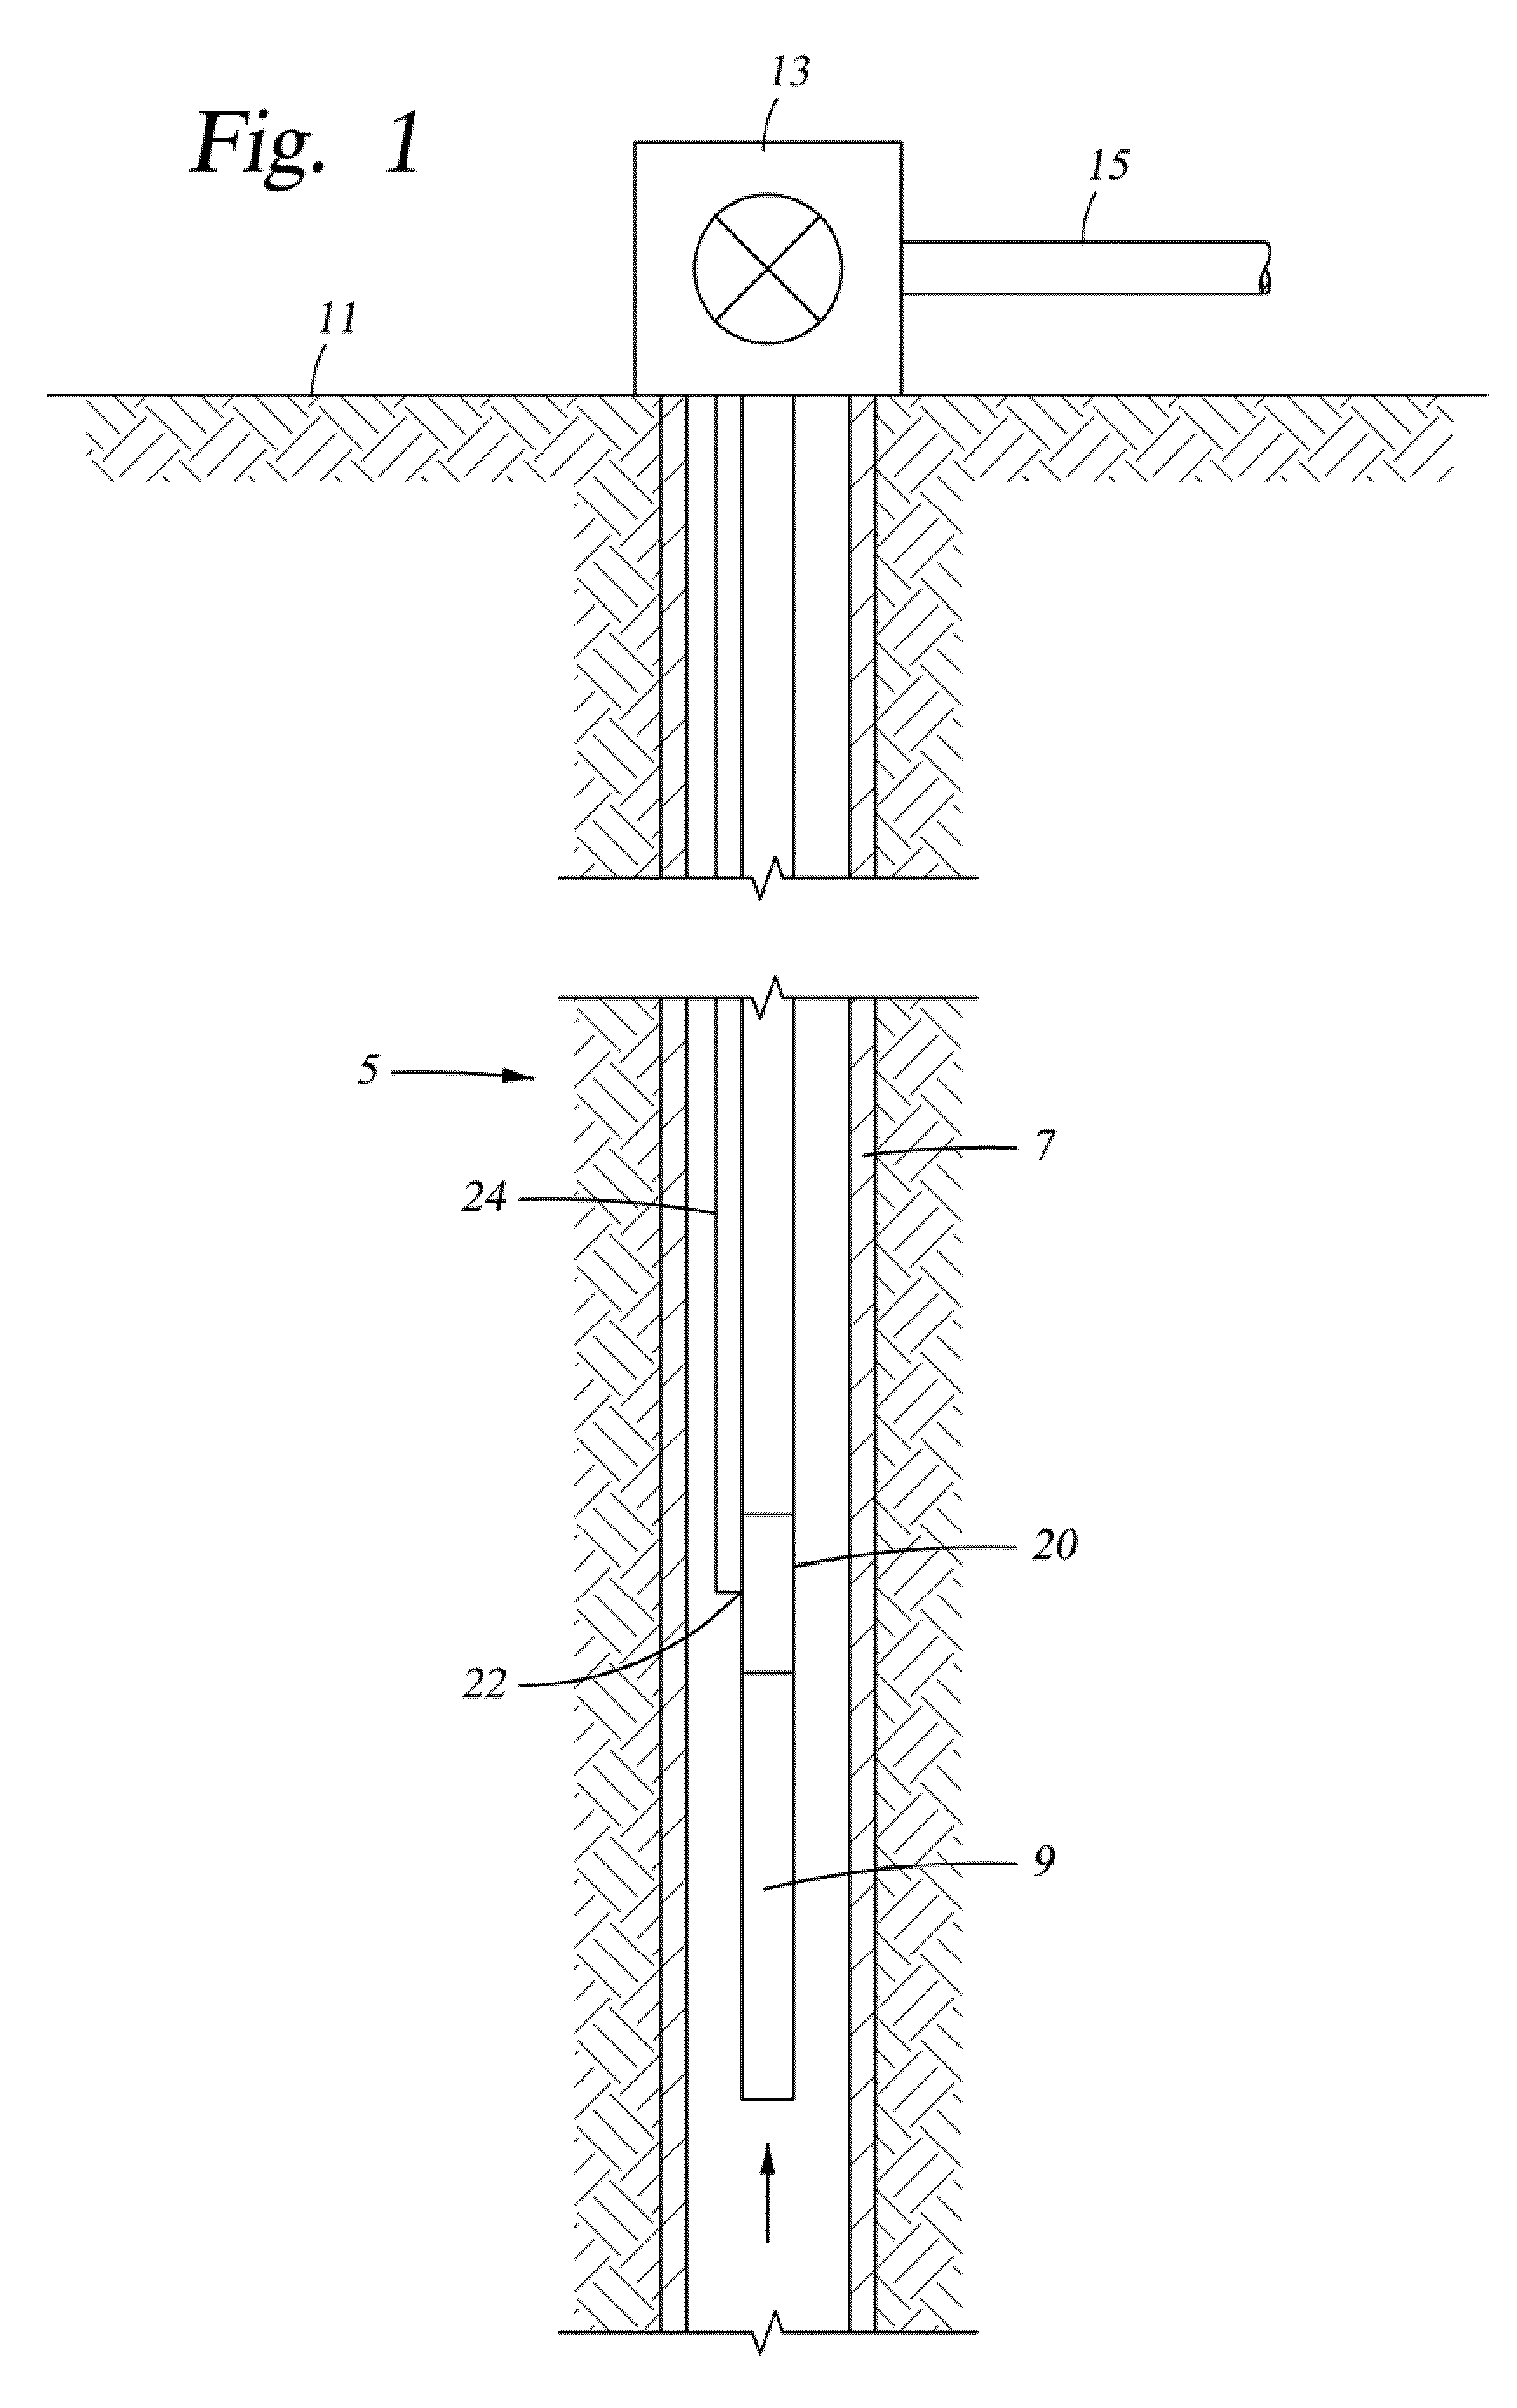 Method of measuring multiphase flow using a multi-stage flow meter